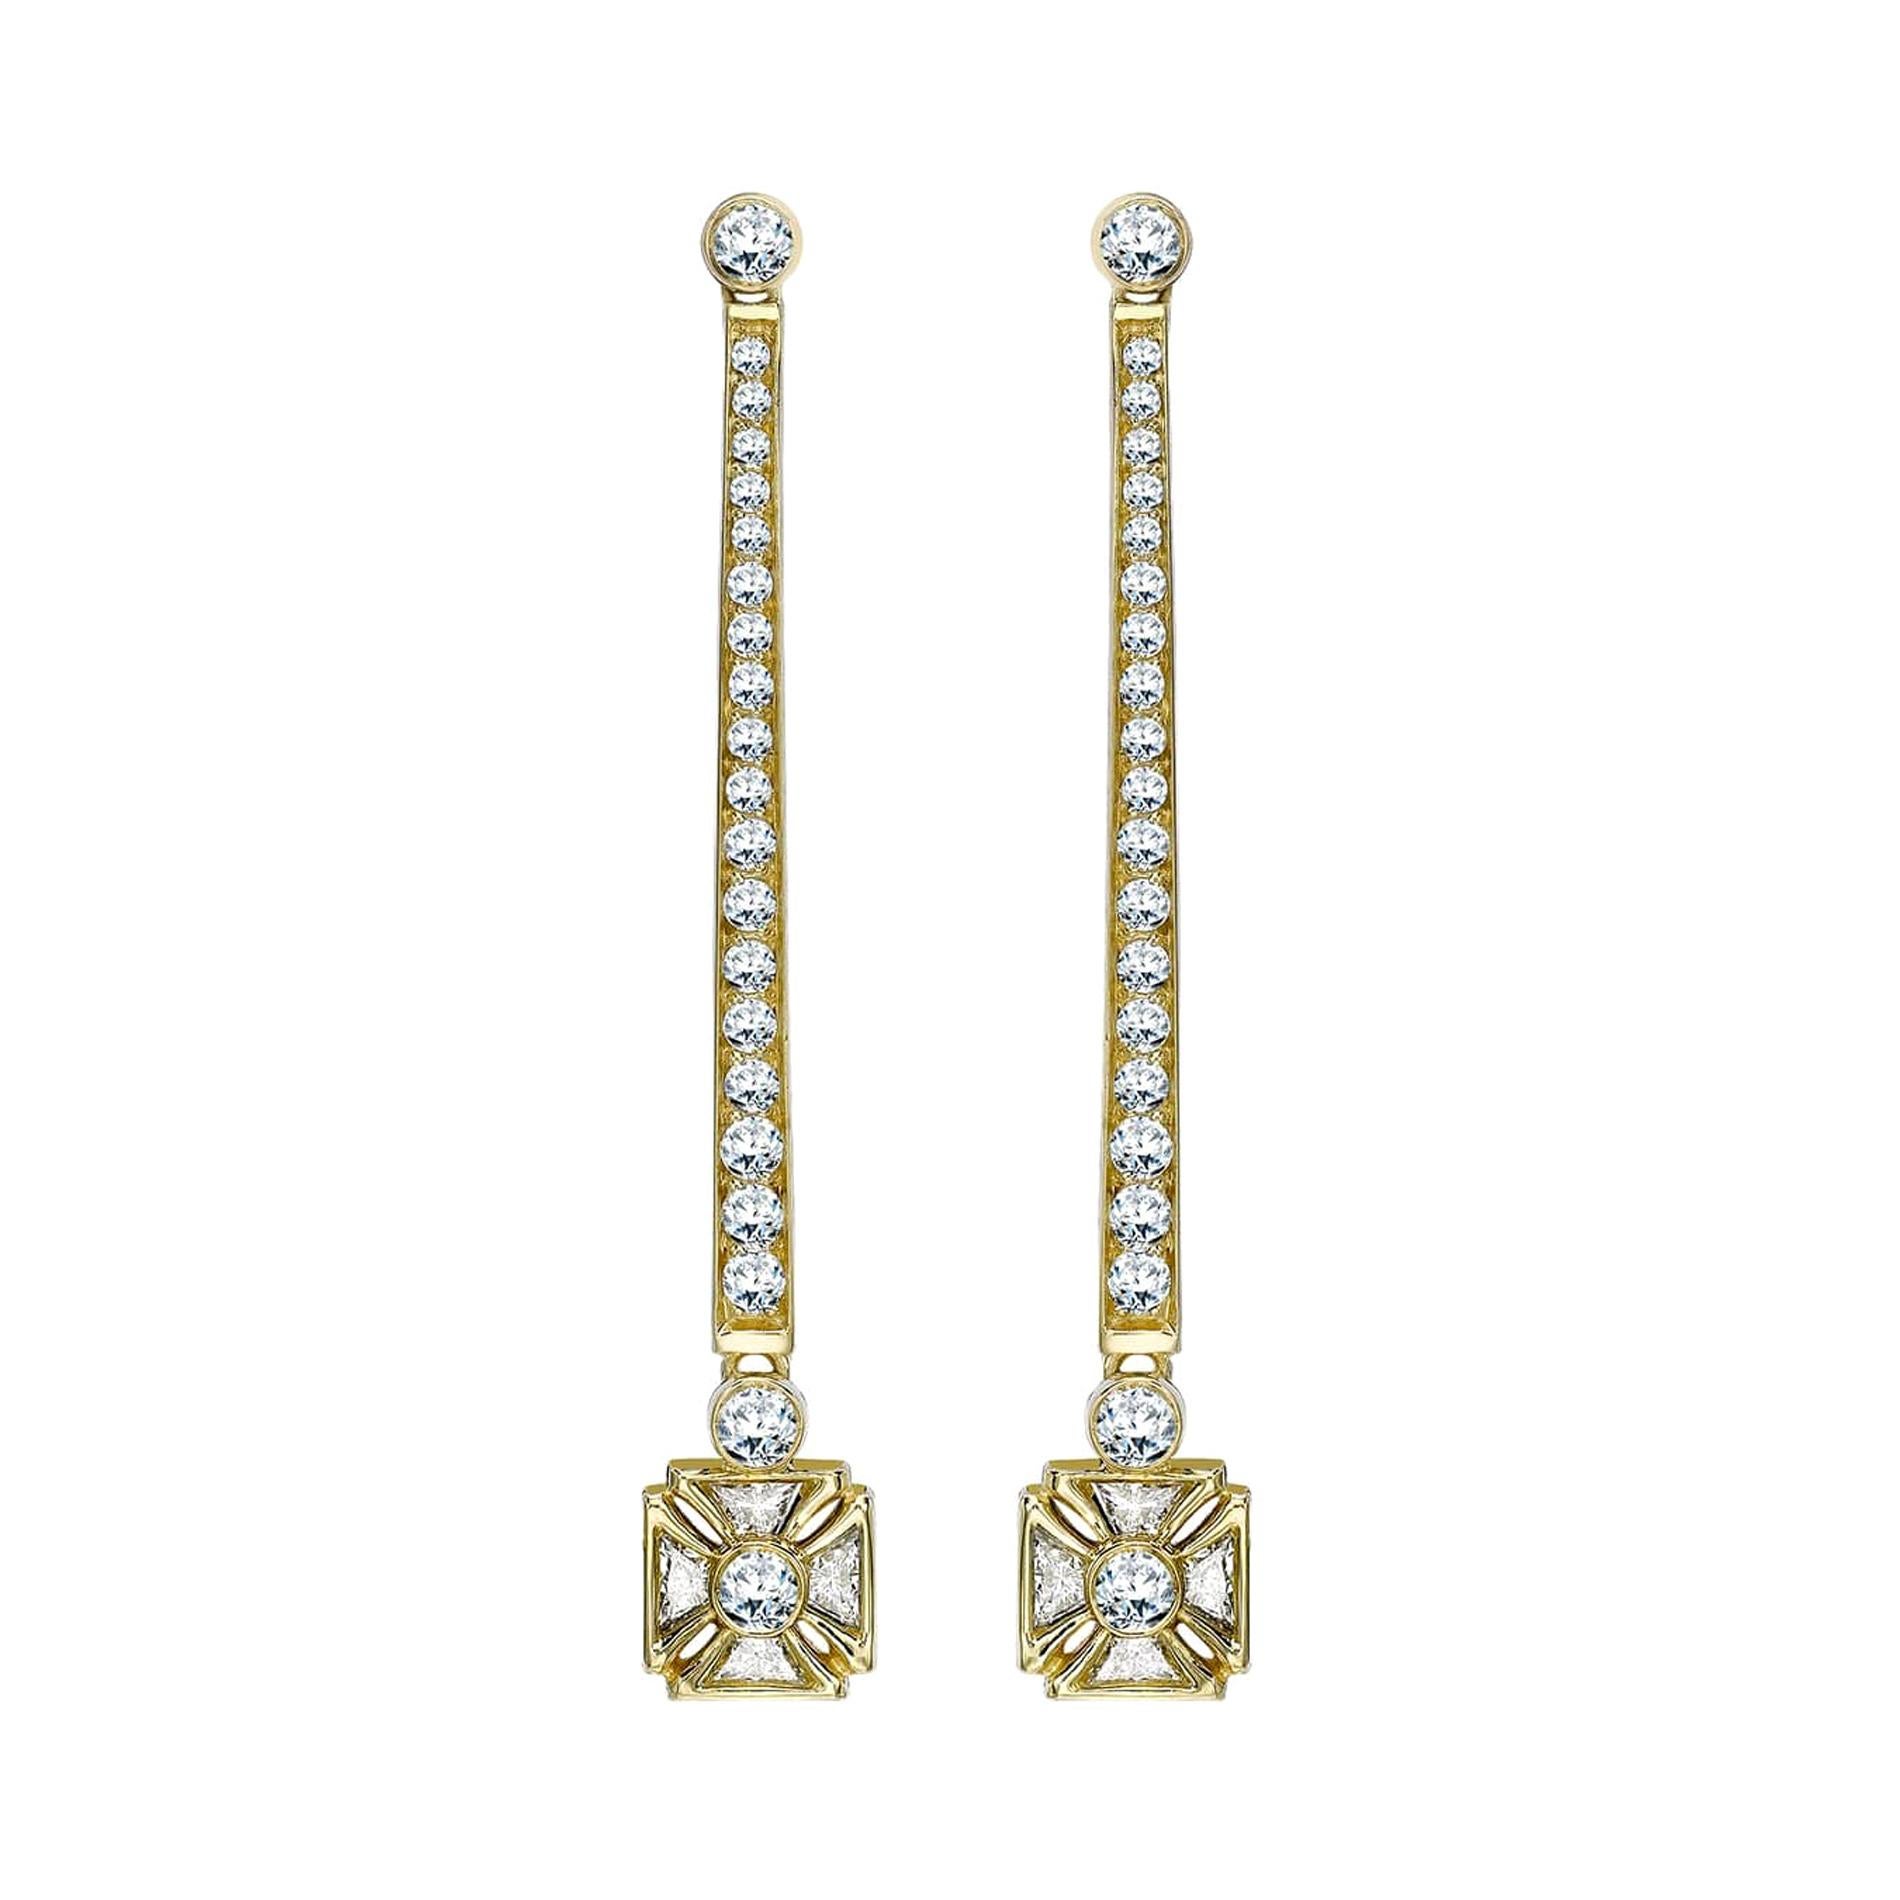 Sybarite Royal Jubilee Earrings in Yellow Gold with White Diamonds For Sale